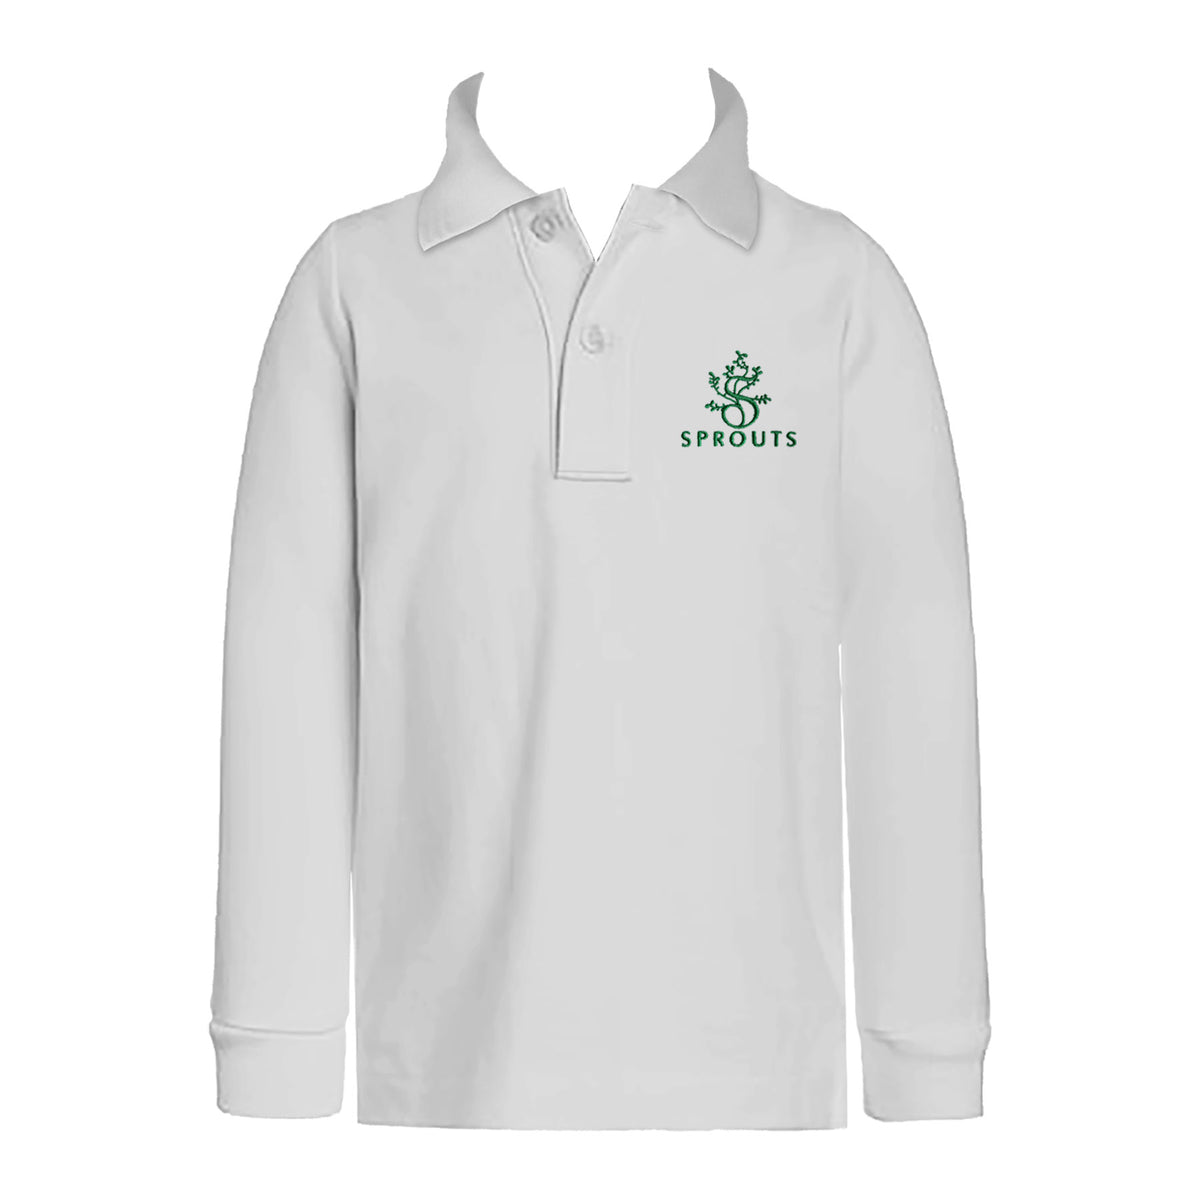 SPROUTS ACADEMY GOLF SHIRT, UNISEX, LONG SLEEVE, YOUTH